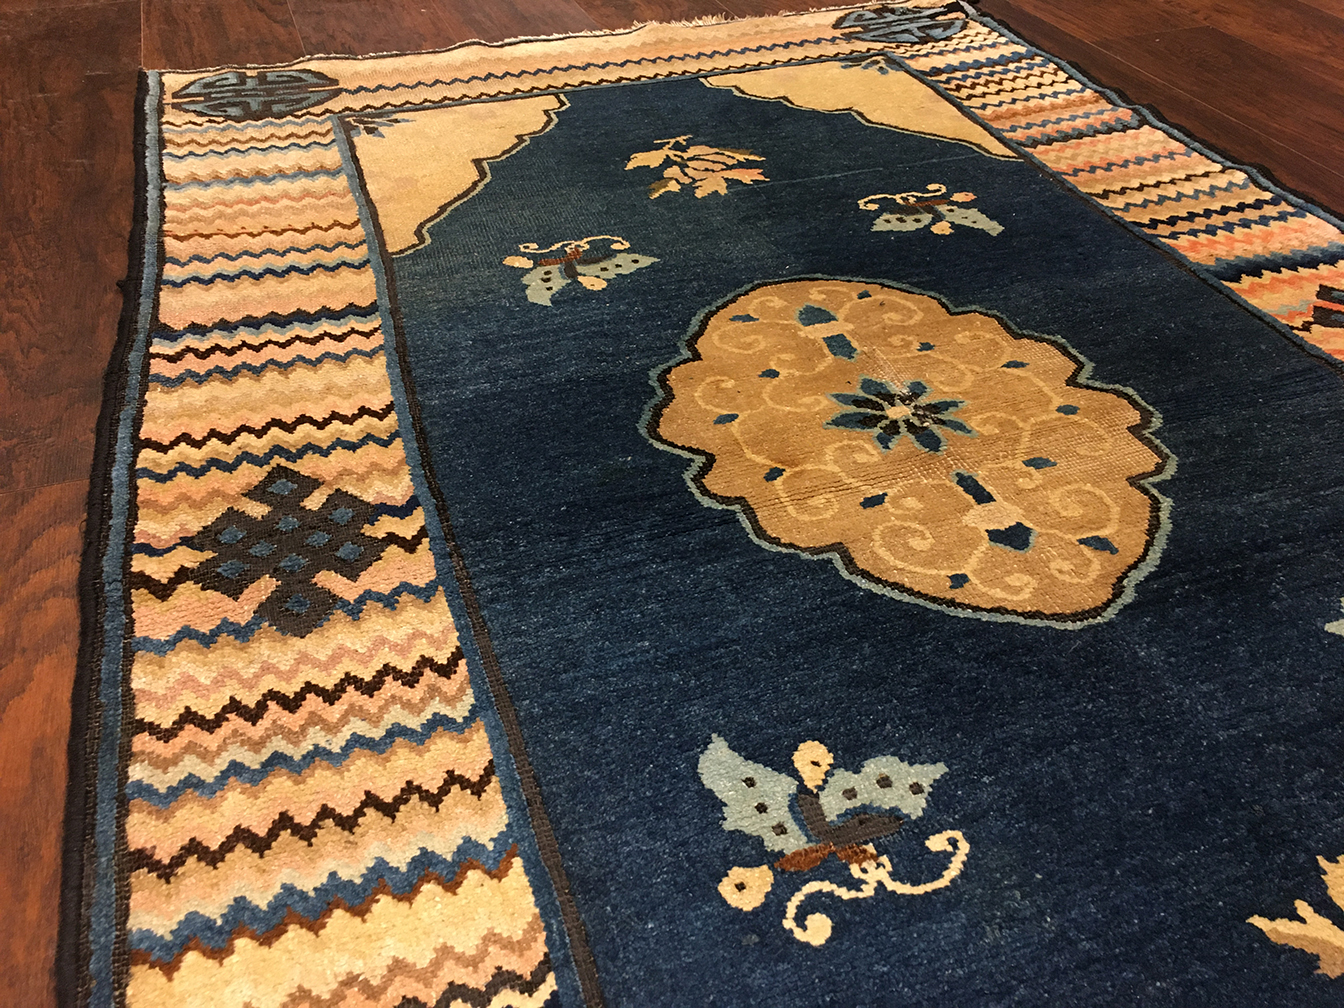 Antique chinese Rug - # 55640